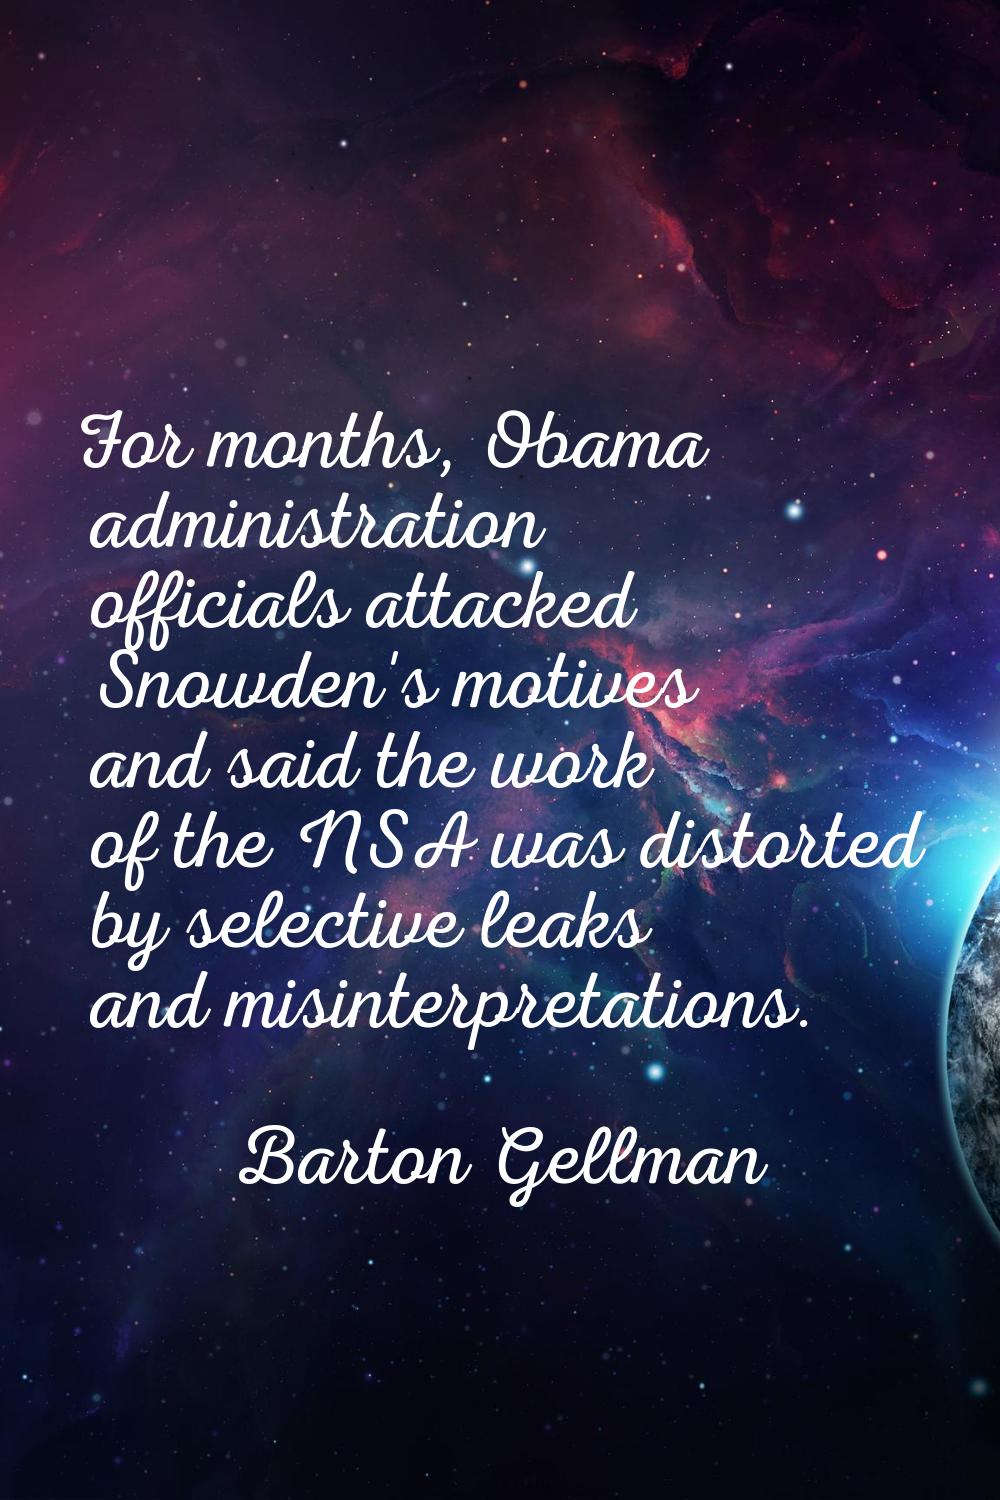 For months, Obama administration officials attacked Snowden's motives and said the work of the NSA 